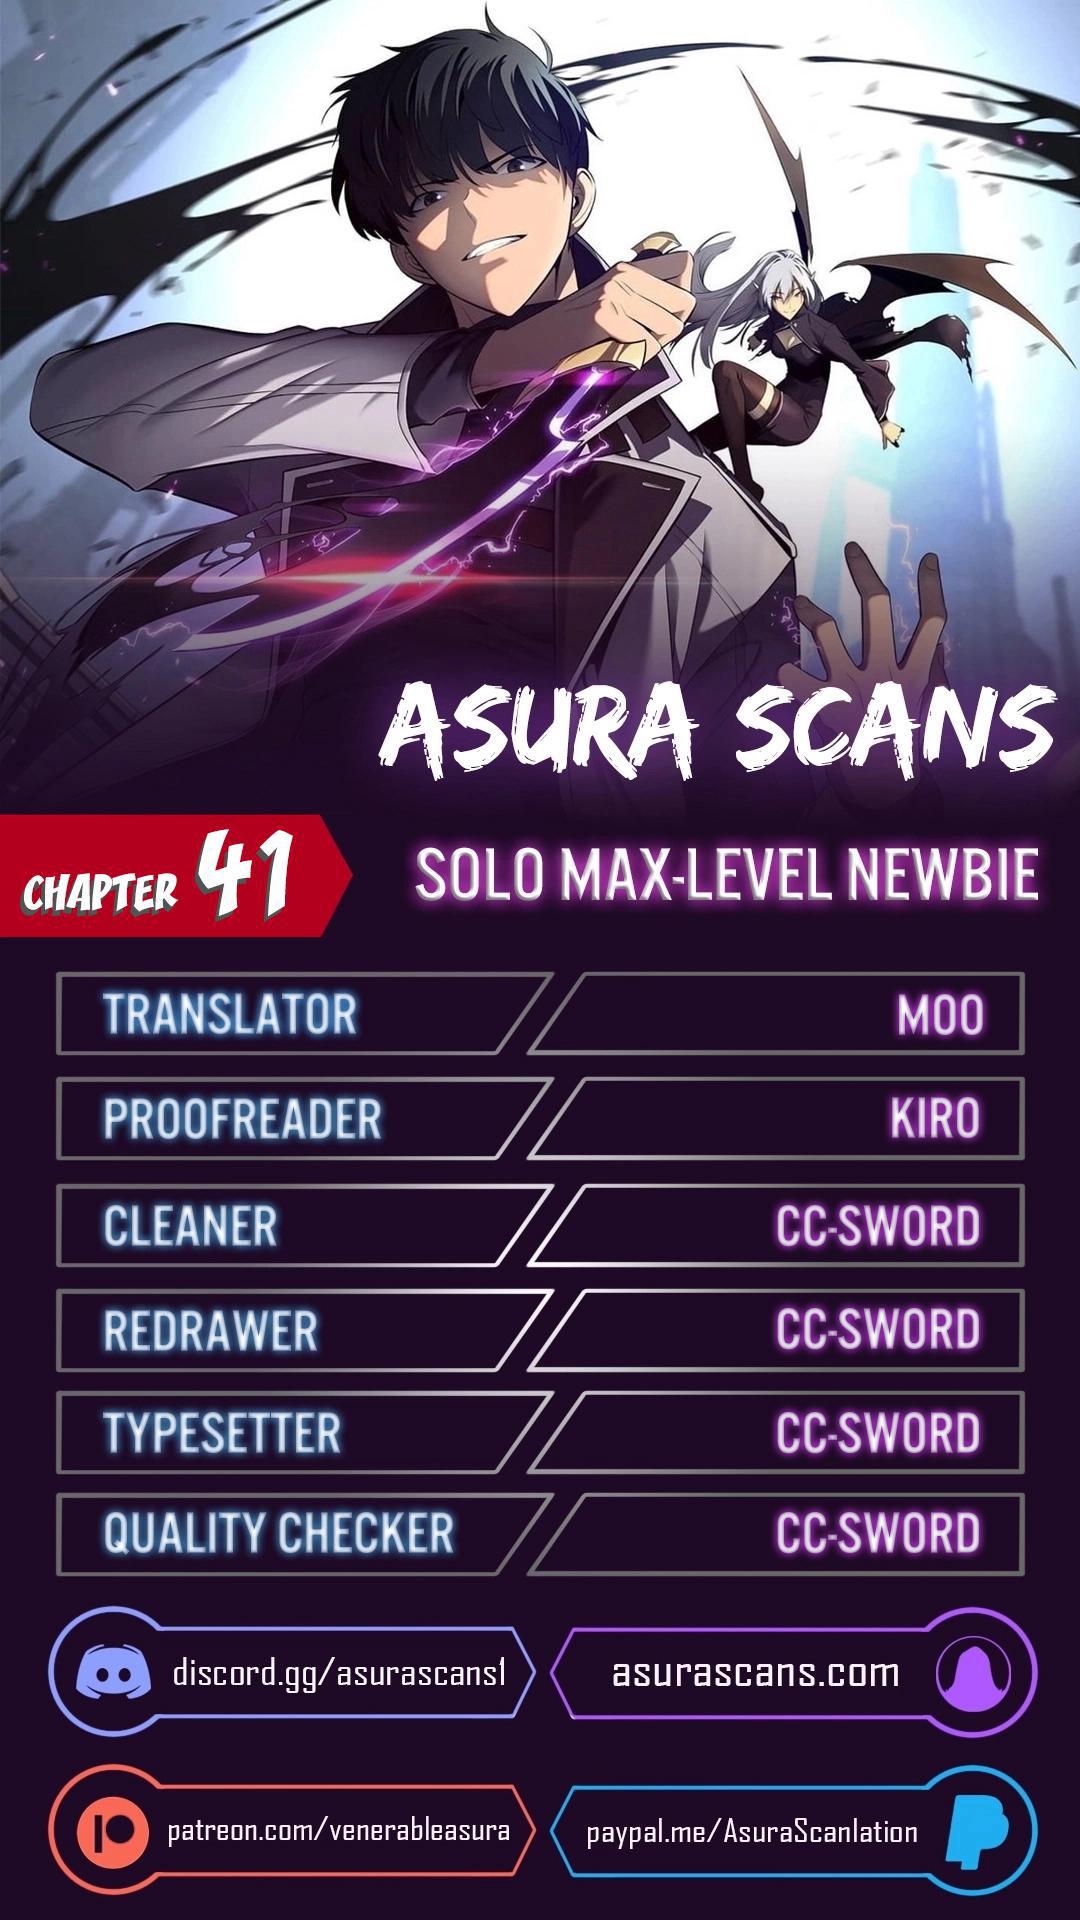 Solo max-level newbie chapter 41